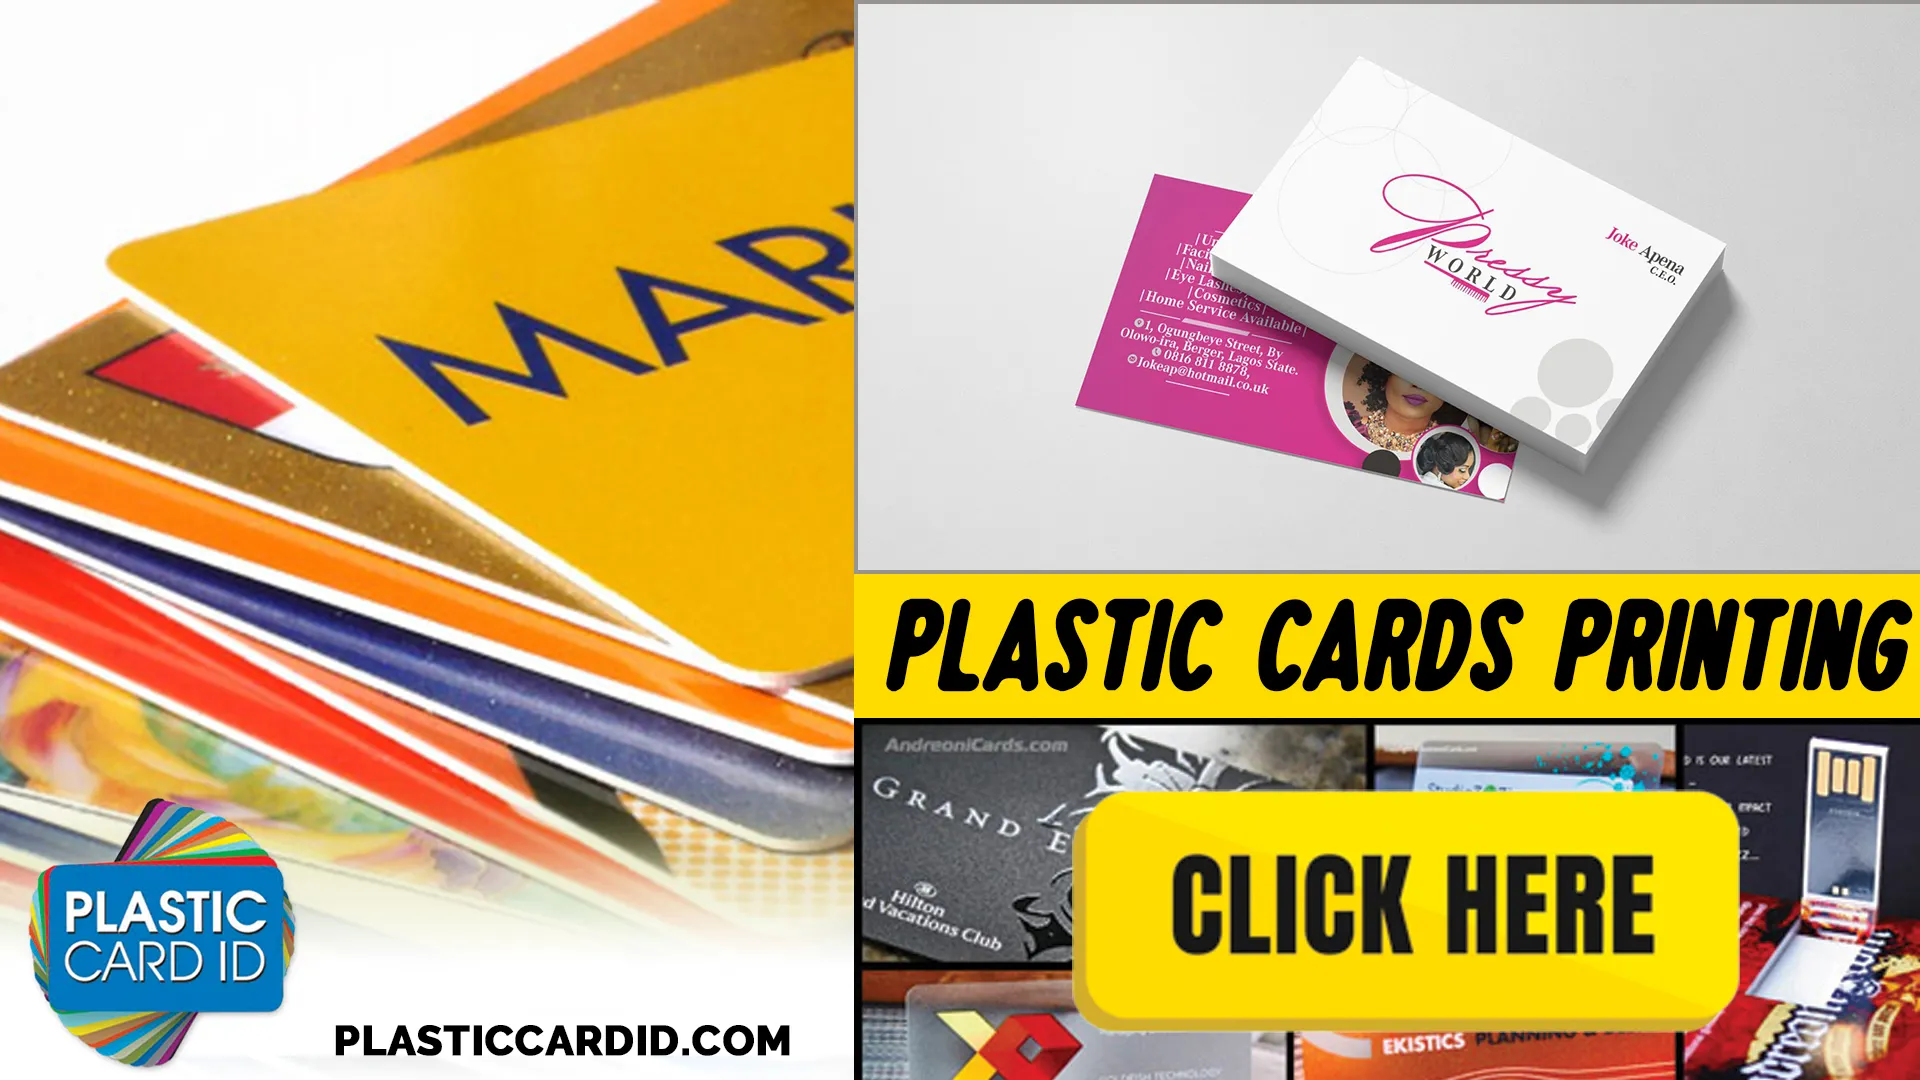 Our Array of High-Quality Card Options